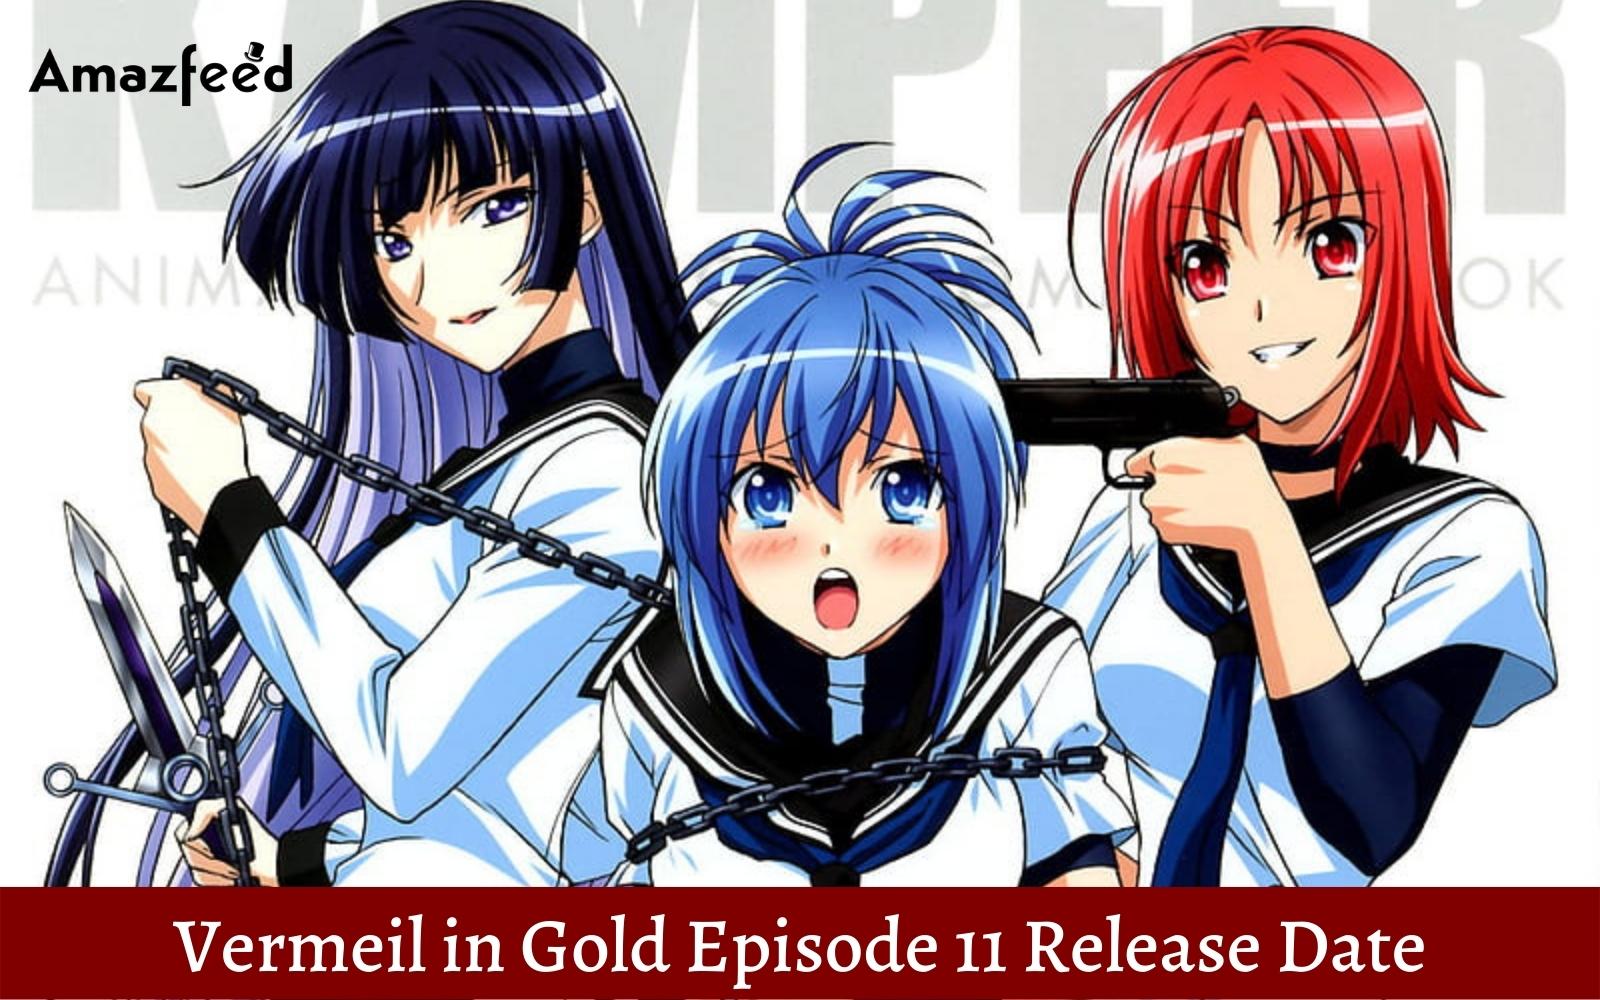 Vermeil in Gold Episode 8 Preview Images Released